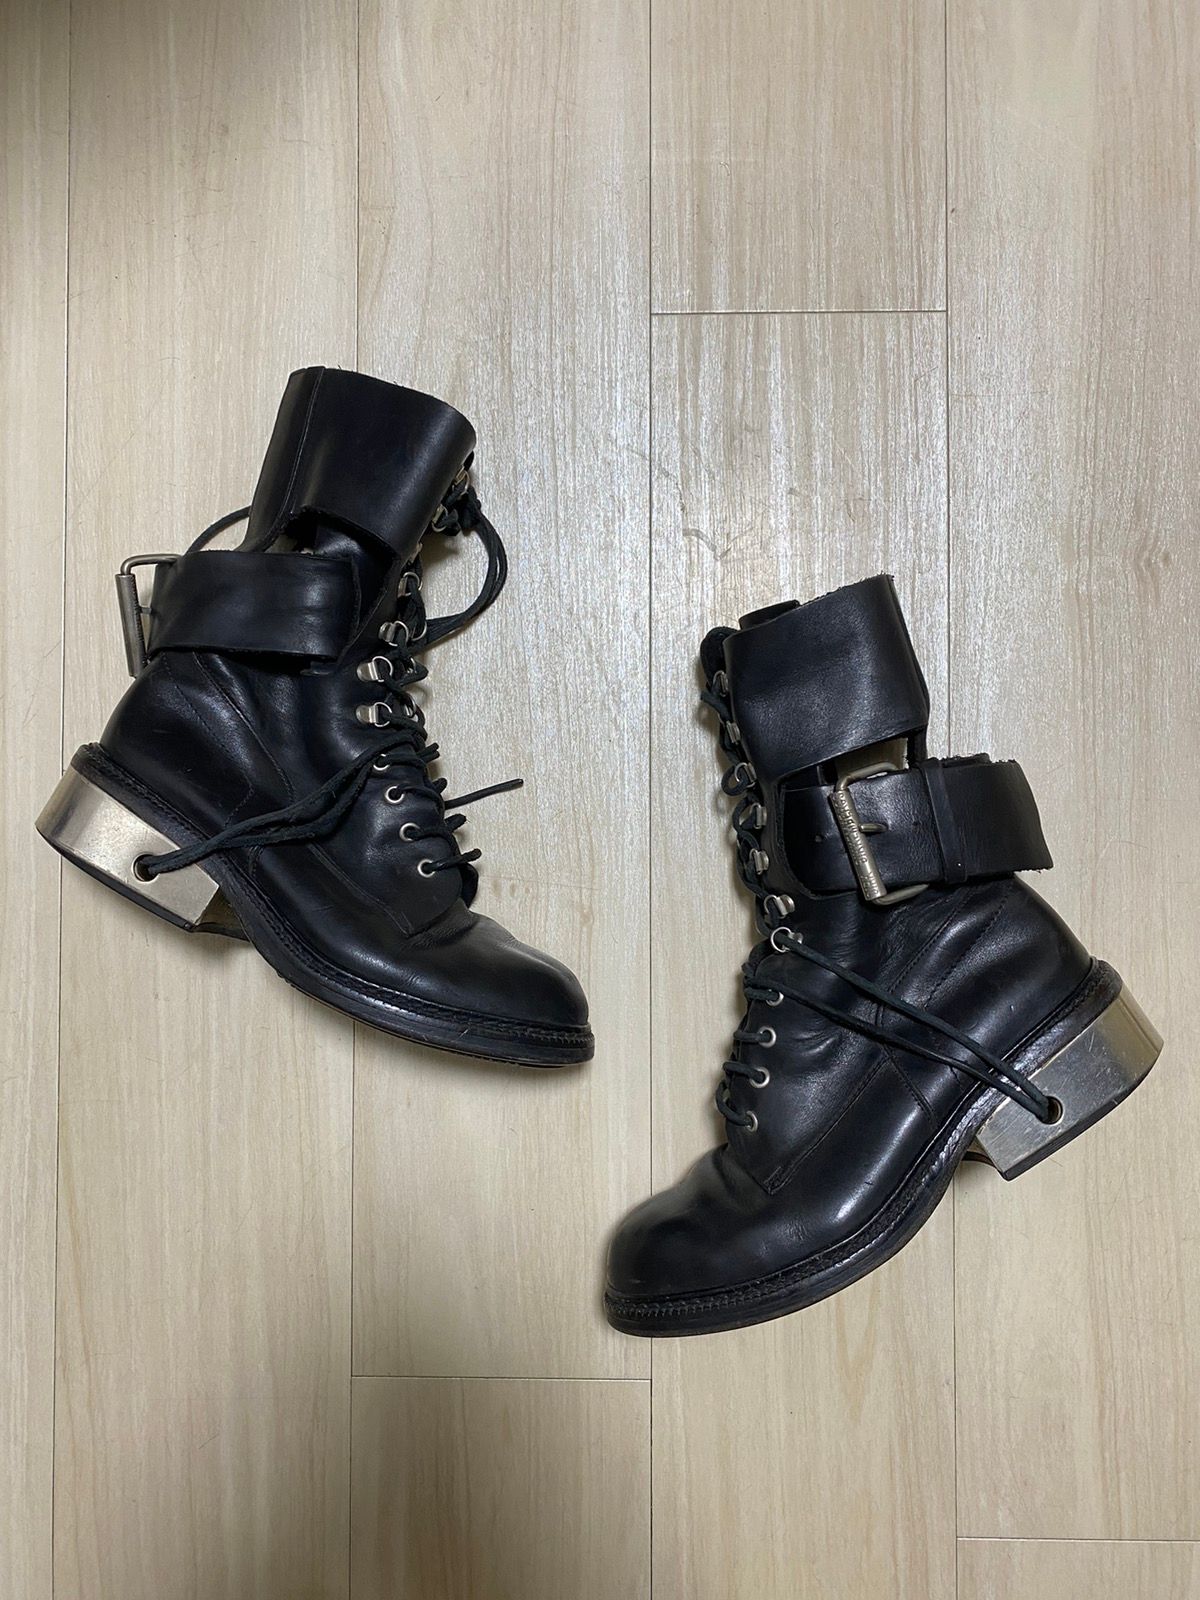 Pre-owned Dirk Bikkembergs Black Metal Lace Through Heel Shoes Boots 1994